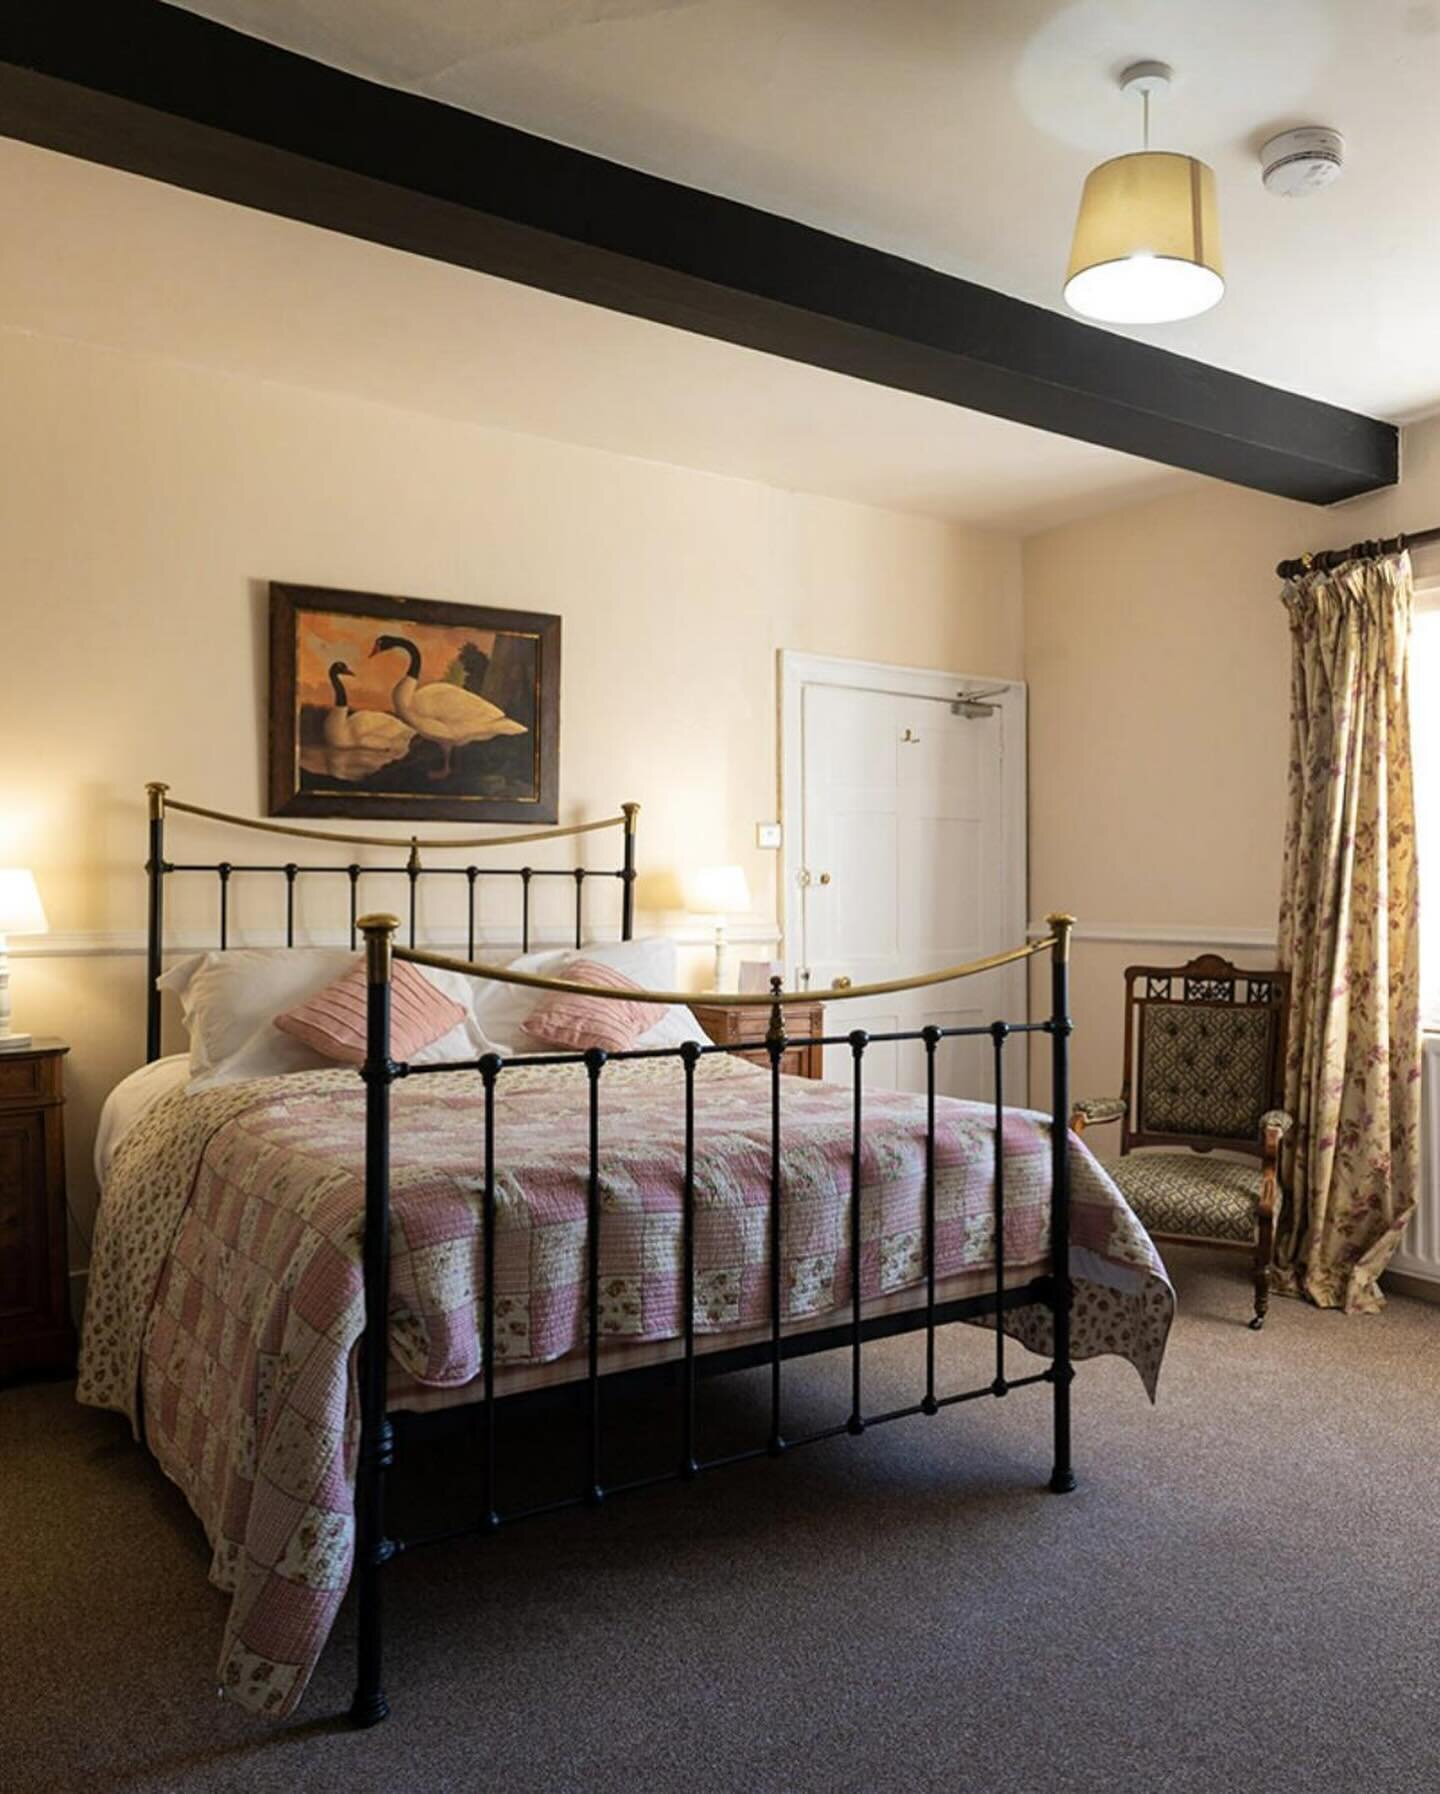 Stay at the @powisarms and explore the beautiful Shropshire countryside 🌲🗺️🍺 

We offer an amazing dinner, bed and breakfast rates and these can be booked via booking.com 💻 

Enjoy some amazing walks from our cosy pub and explore the Shropshire c